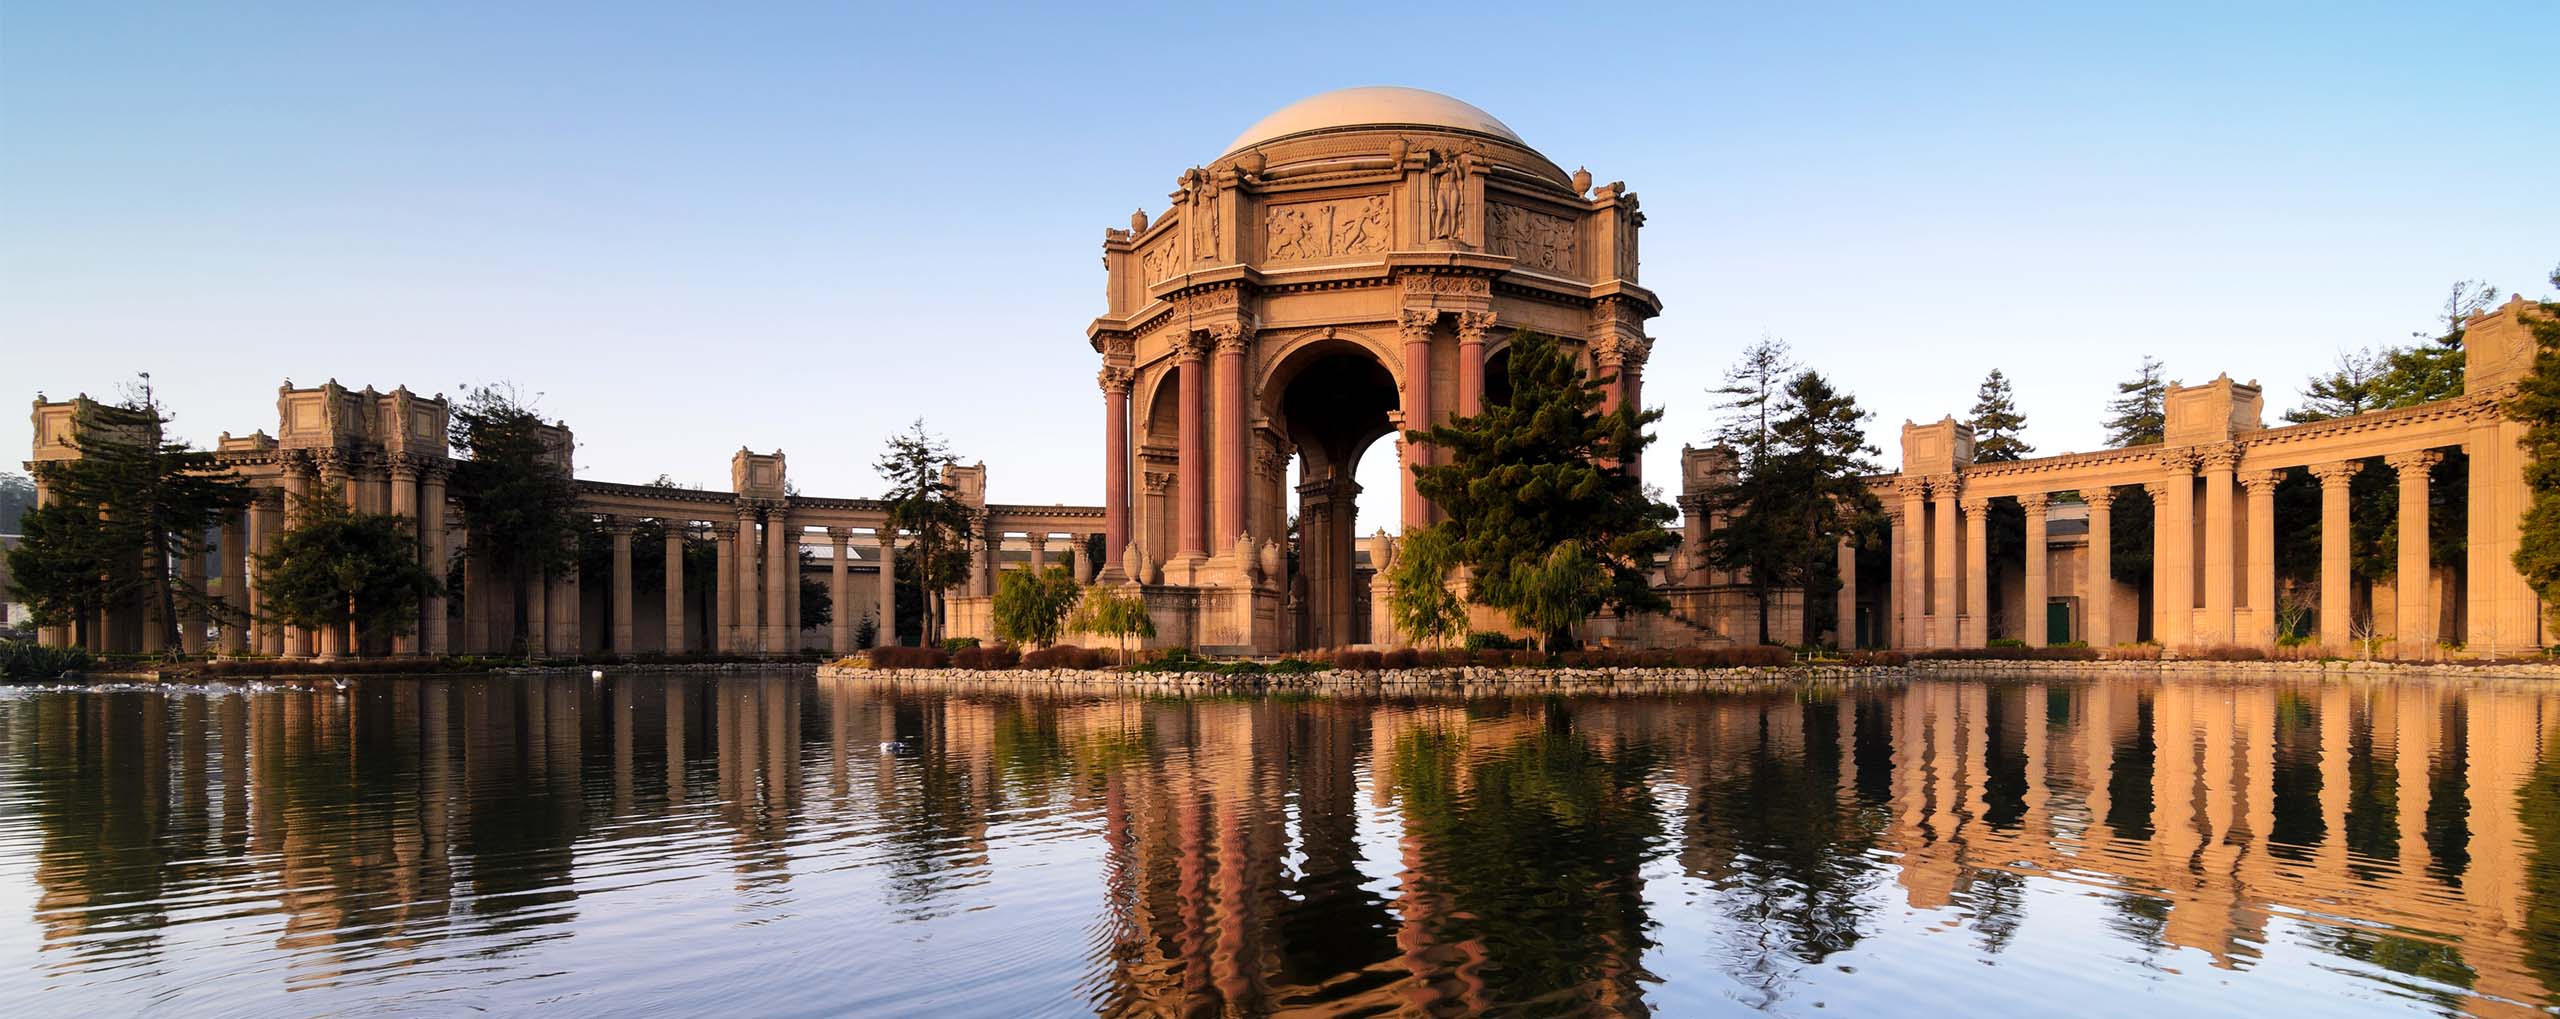 San Francisco Palace of Fine Arts Exterior Water Day